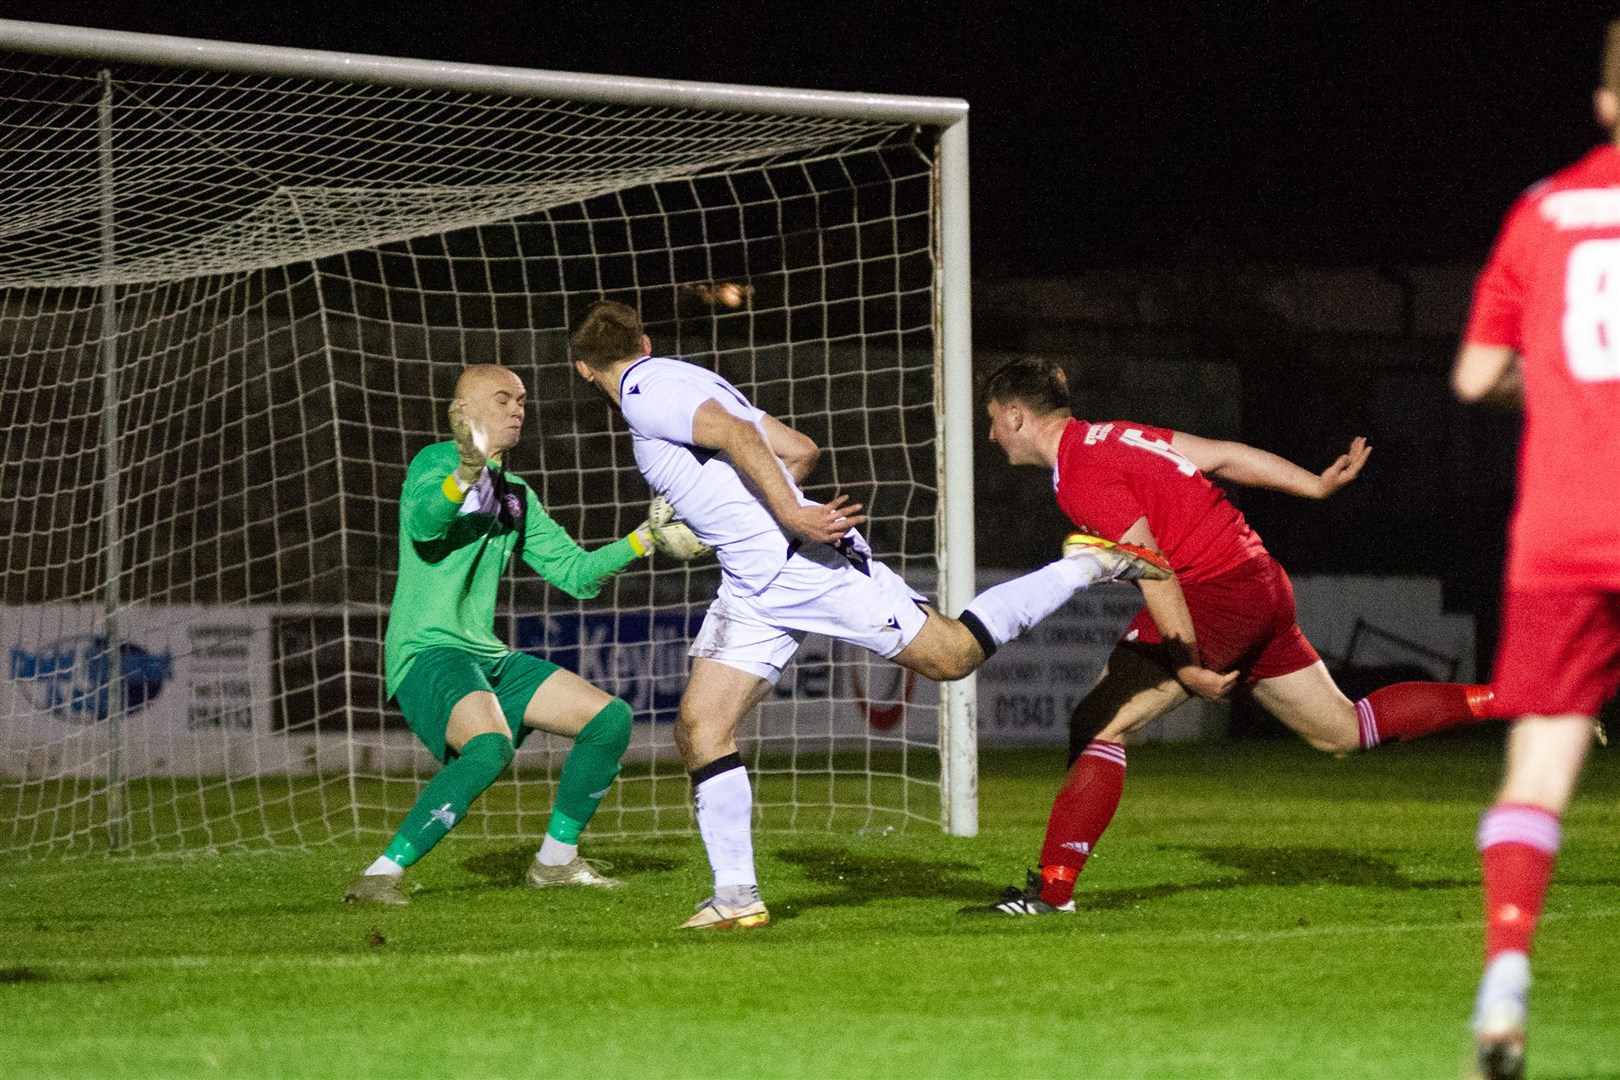 Lossiemouth keeper Logan Ross saves another headed effort - this time from Rothes' Gary Kerr.